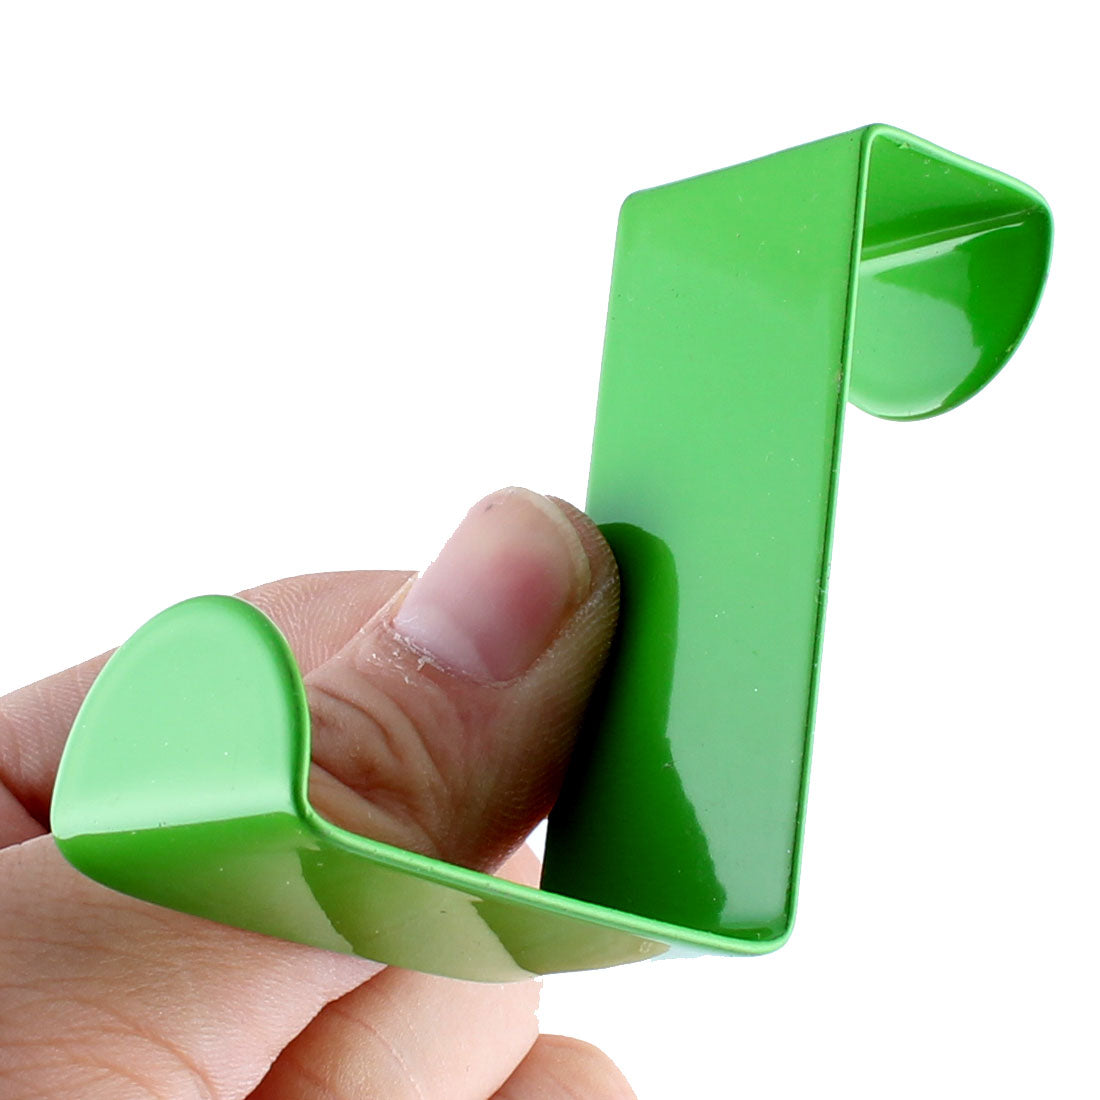 uxcell Uxcell Household Metal Z Shaped Over Door Hooks Clothes Towel Hanger Holder Green 2 Pcs